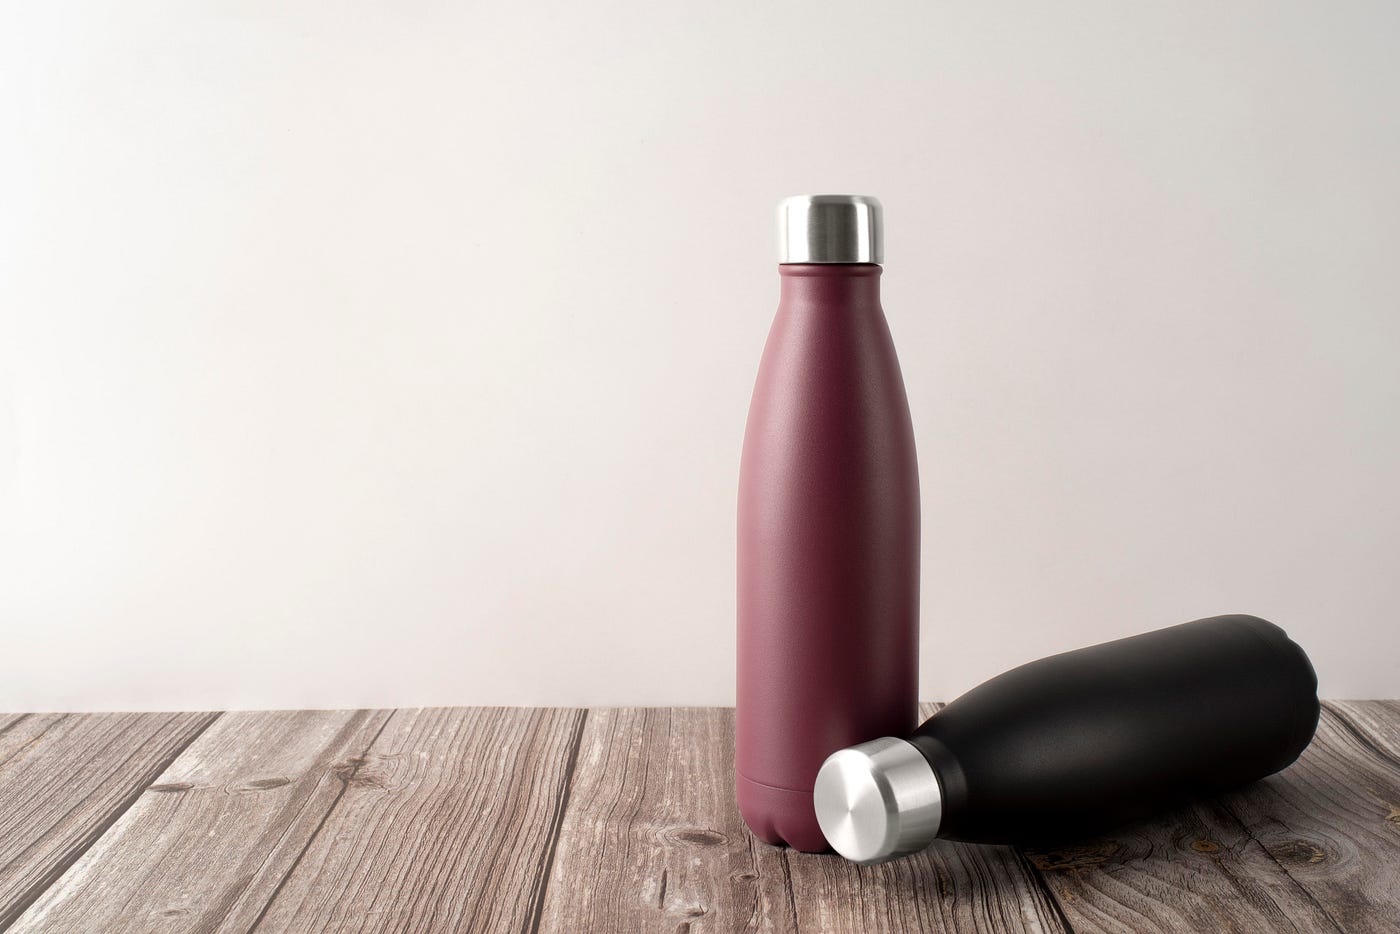 Owala Water Bottle Dimensions: Finding the Perfect Fit for Your Lifestyle, by Qaiserg